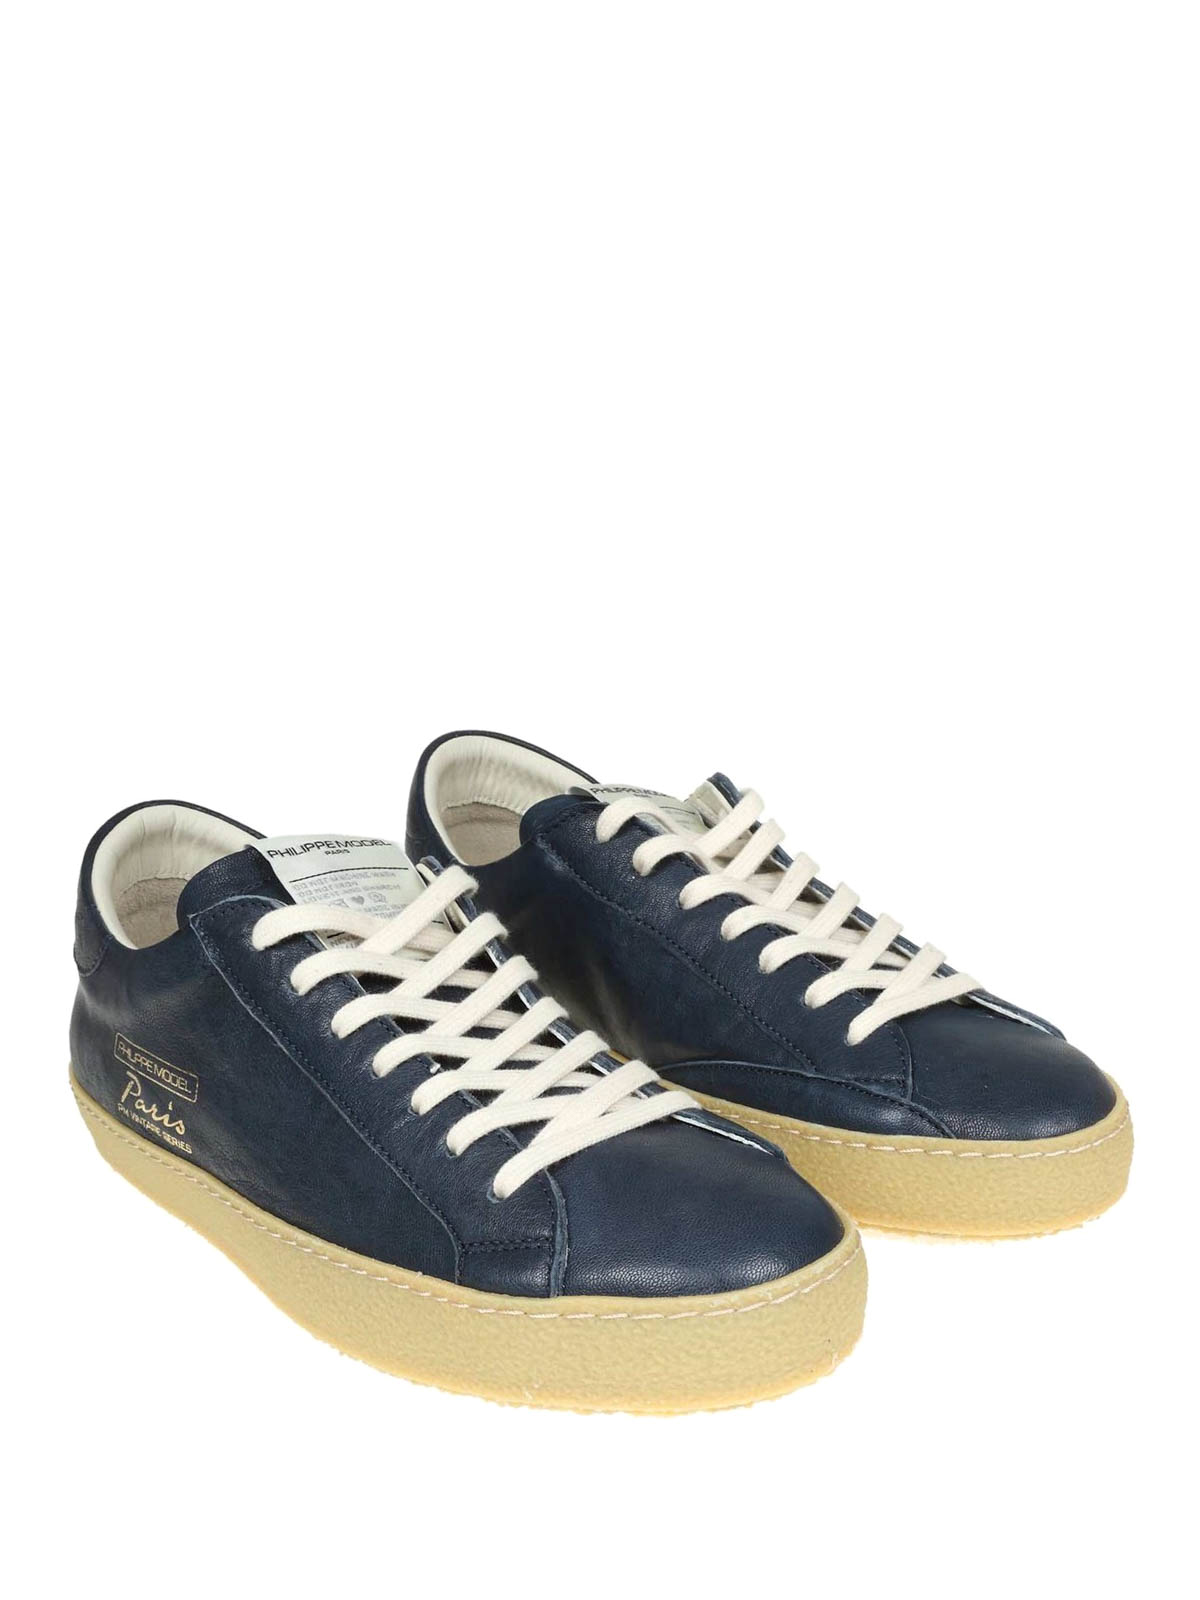 Philippe Model - Paris Vintage soft leather sneakers - CVLUWW21